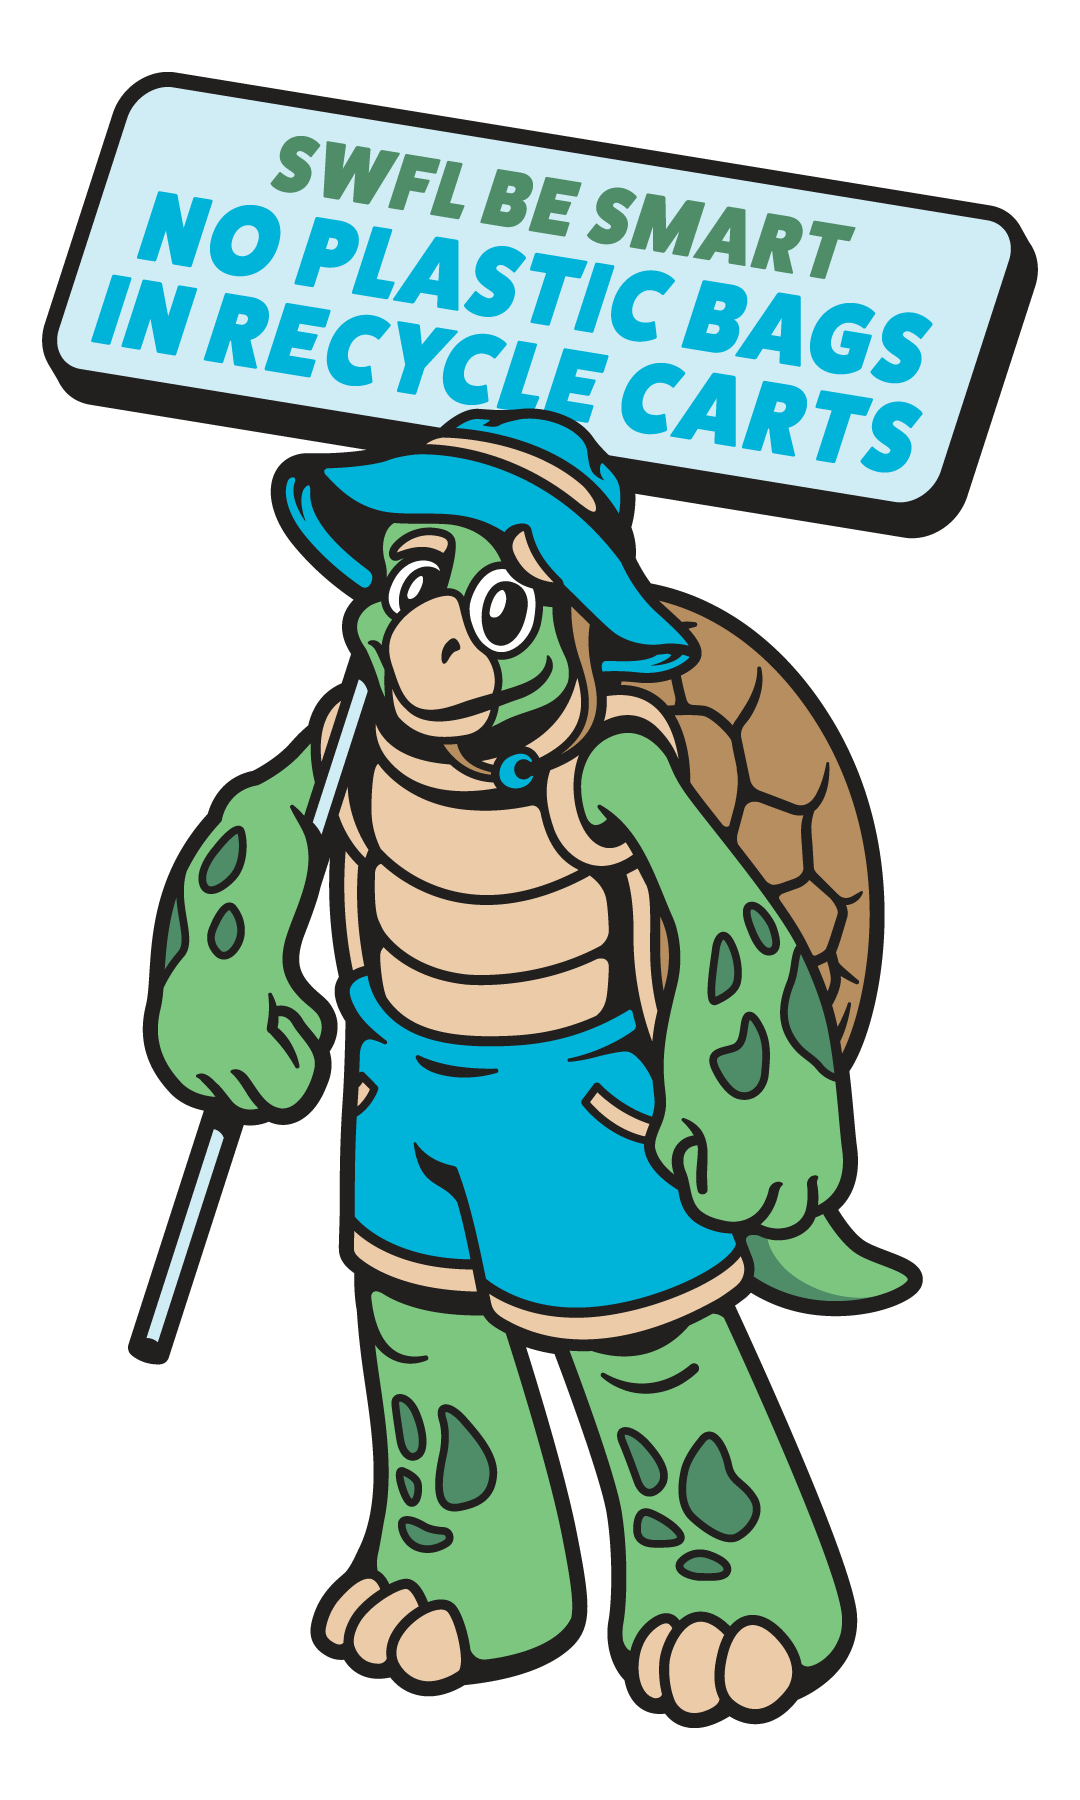 Local counties introduce Titan the Turtle mascot